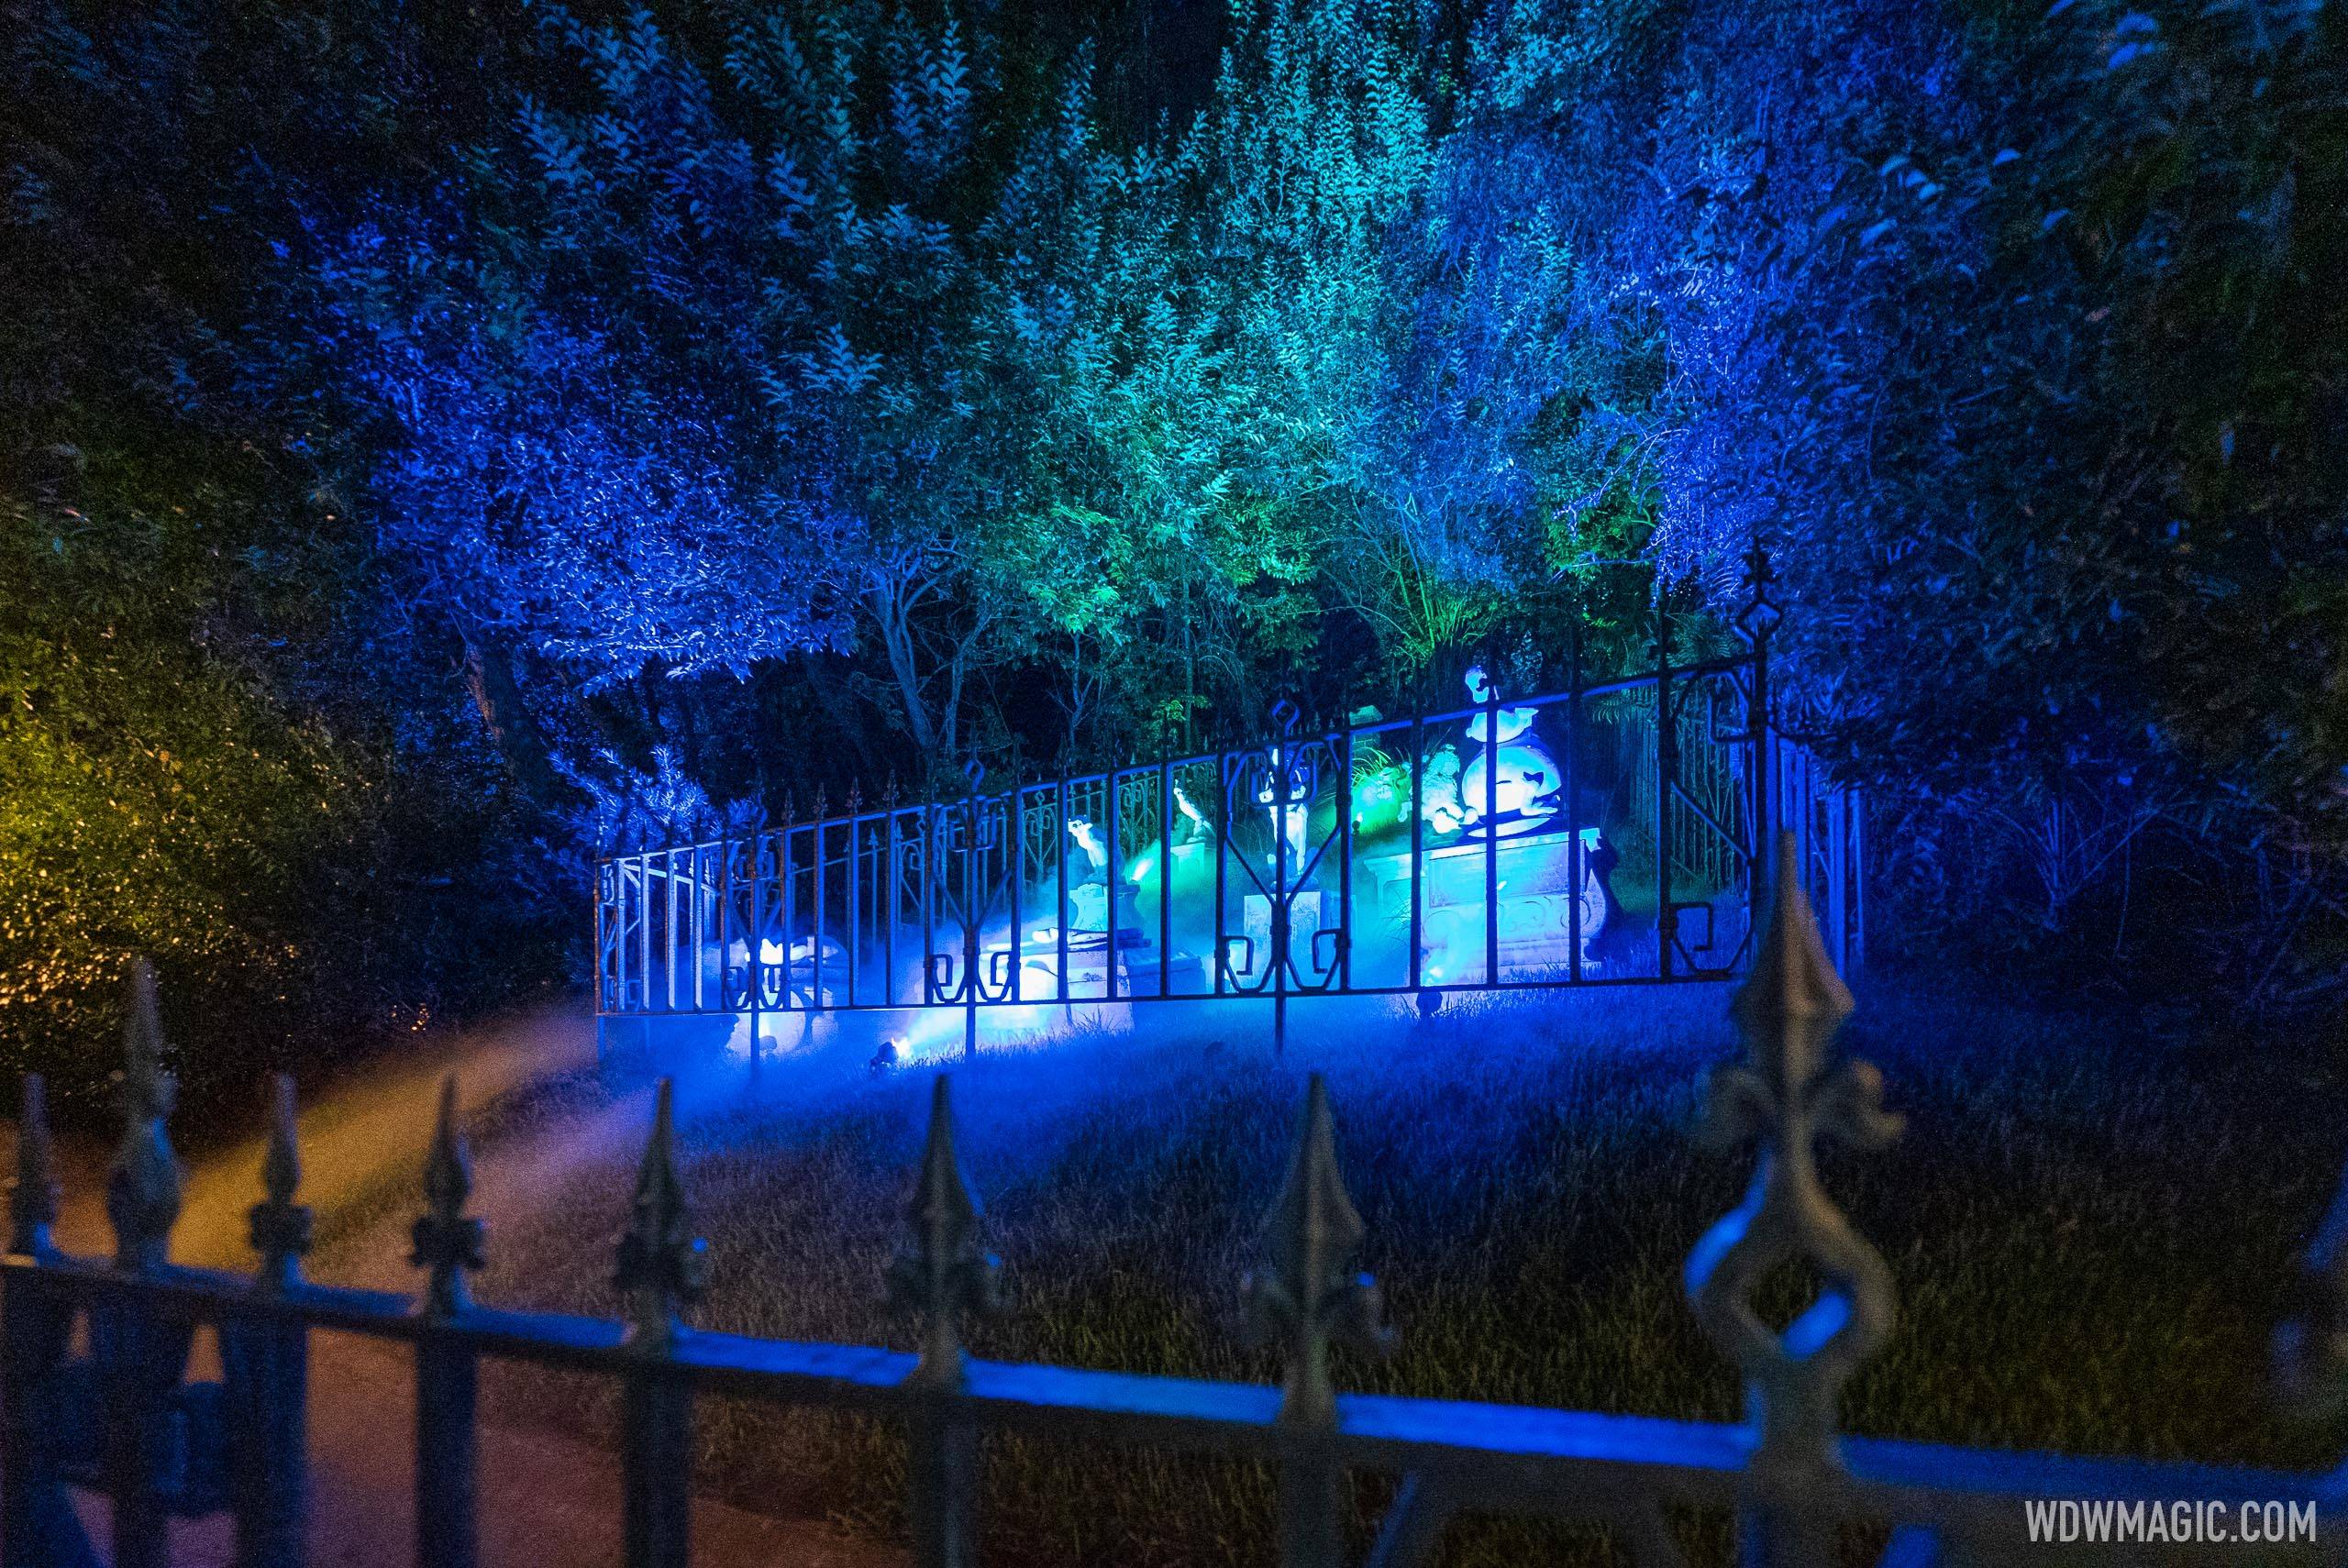 Special lighting at the Haunted Mansion Pet Cemetery